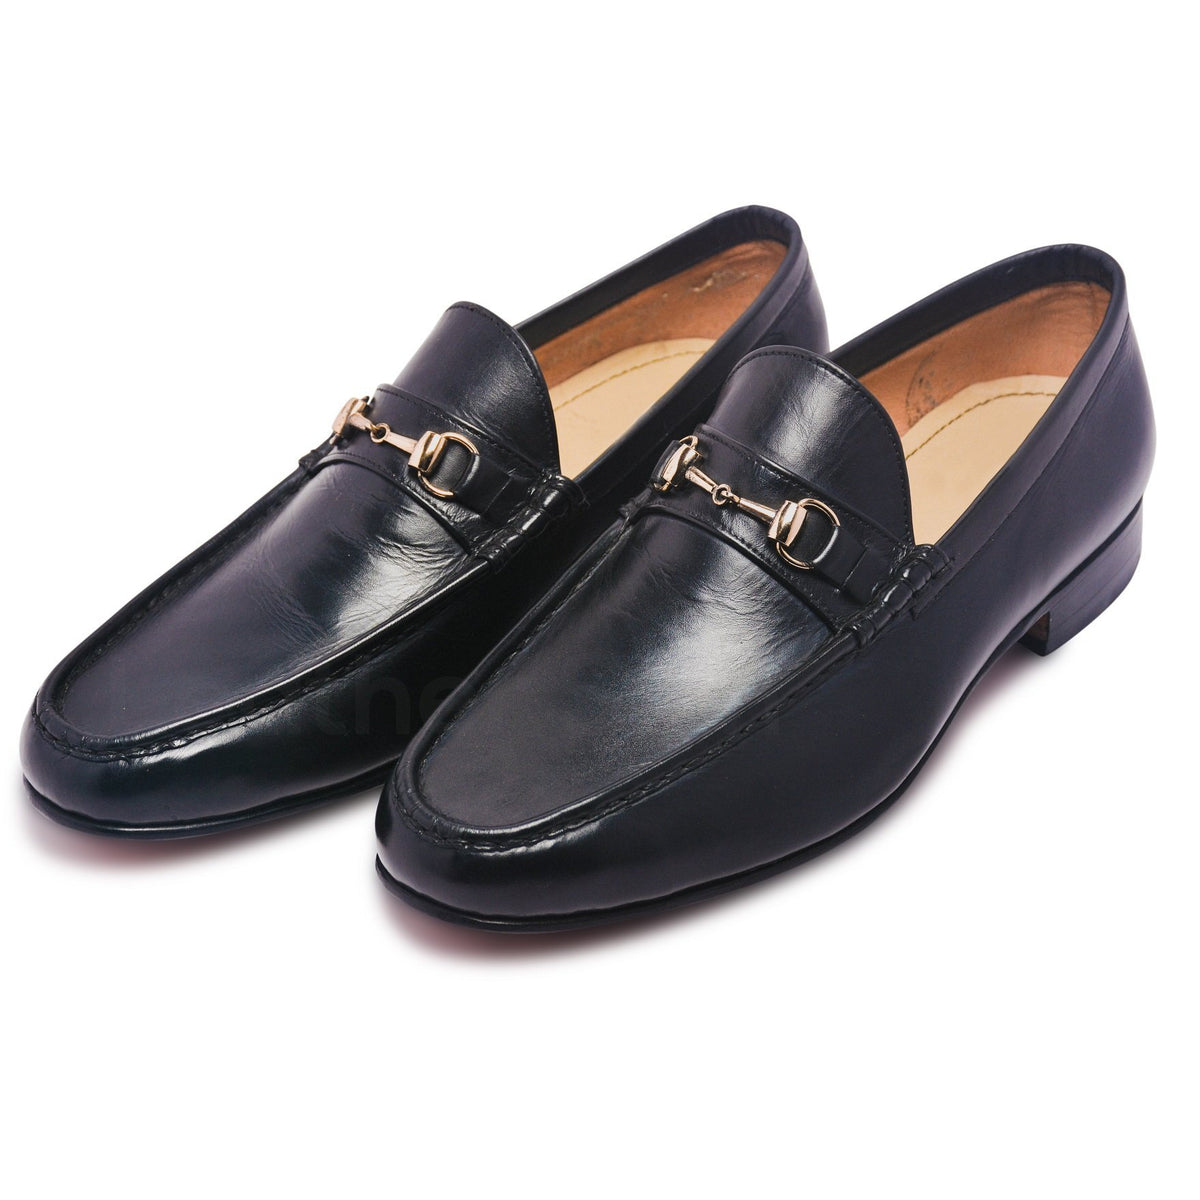 Buy ALPNOME Kid's-Boy's Trending Stylish Black Formal Suede Velvet Loafers  Shoes (Numeric_7) at Amazon.in